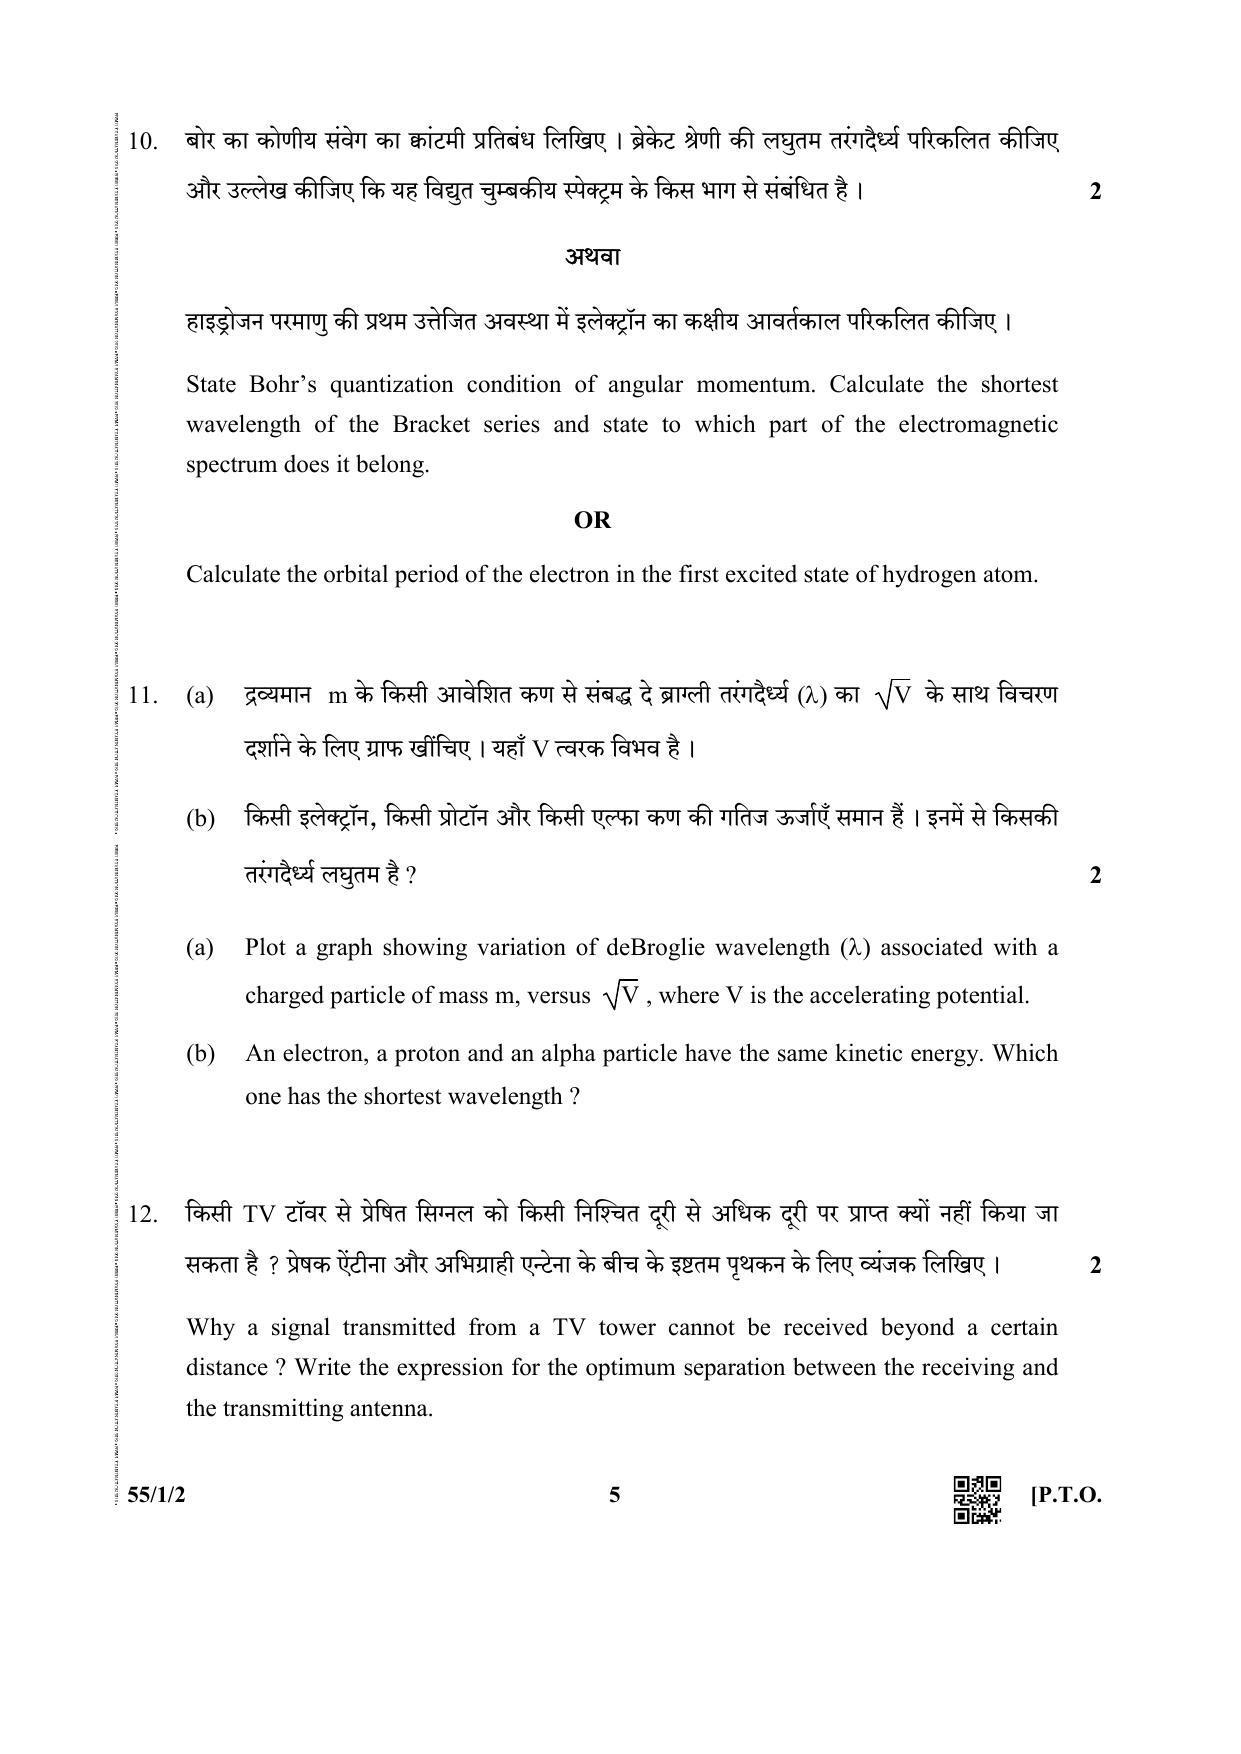 CBSE Class 12 55-1-2 (Physics) 2019 Question Paper - Page 5